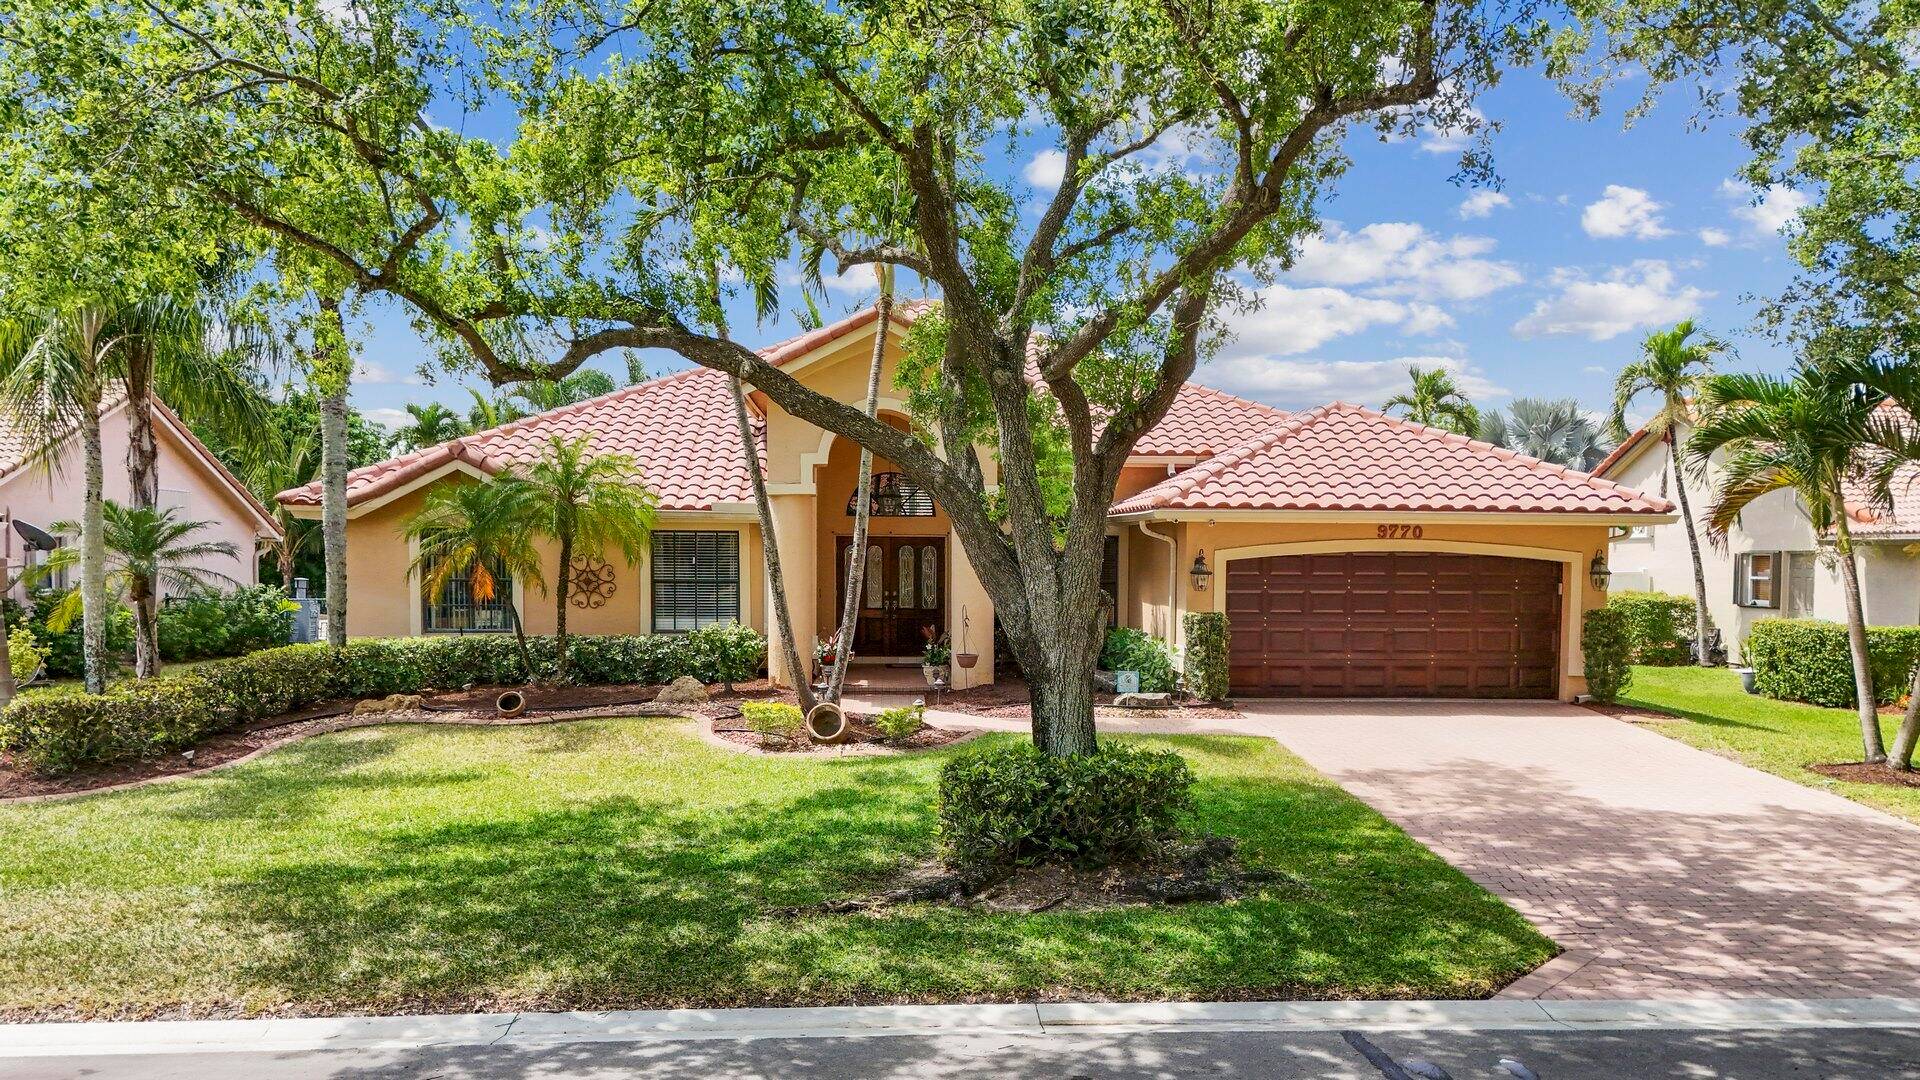 Welcome to this stunning 4 bedroom, 3 bath pool home located in a desirable community with very low HOA fees.